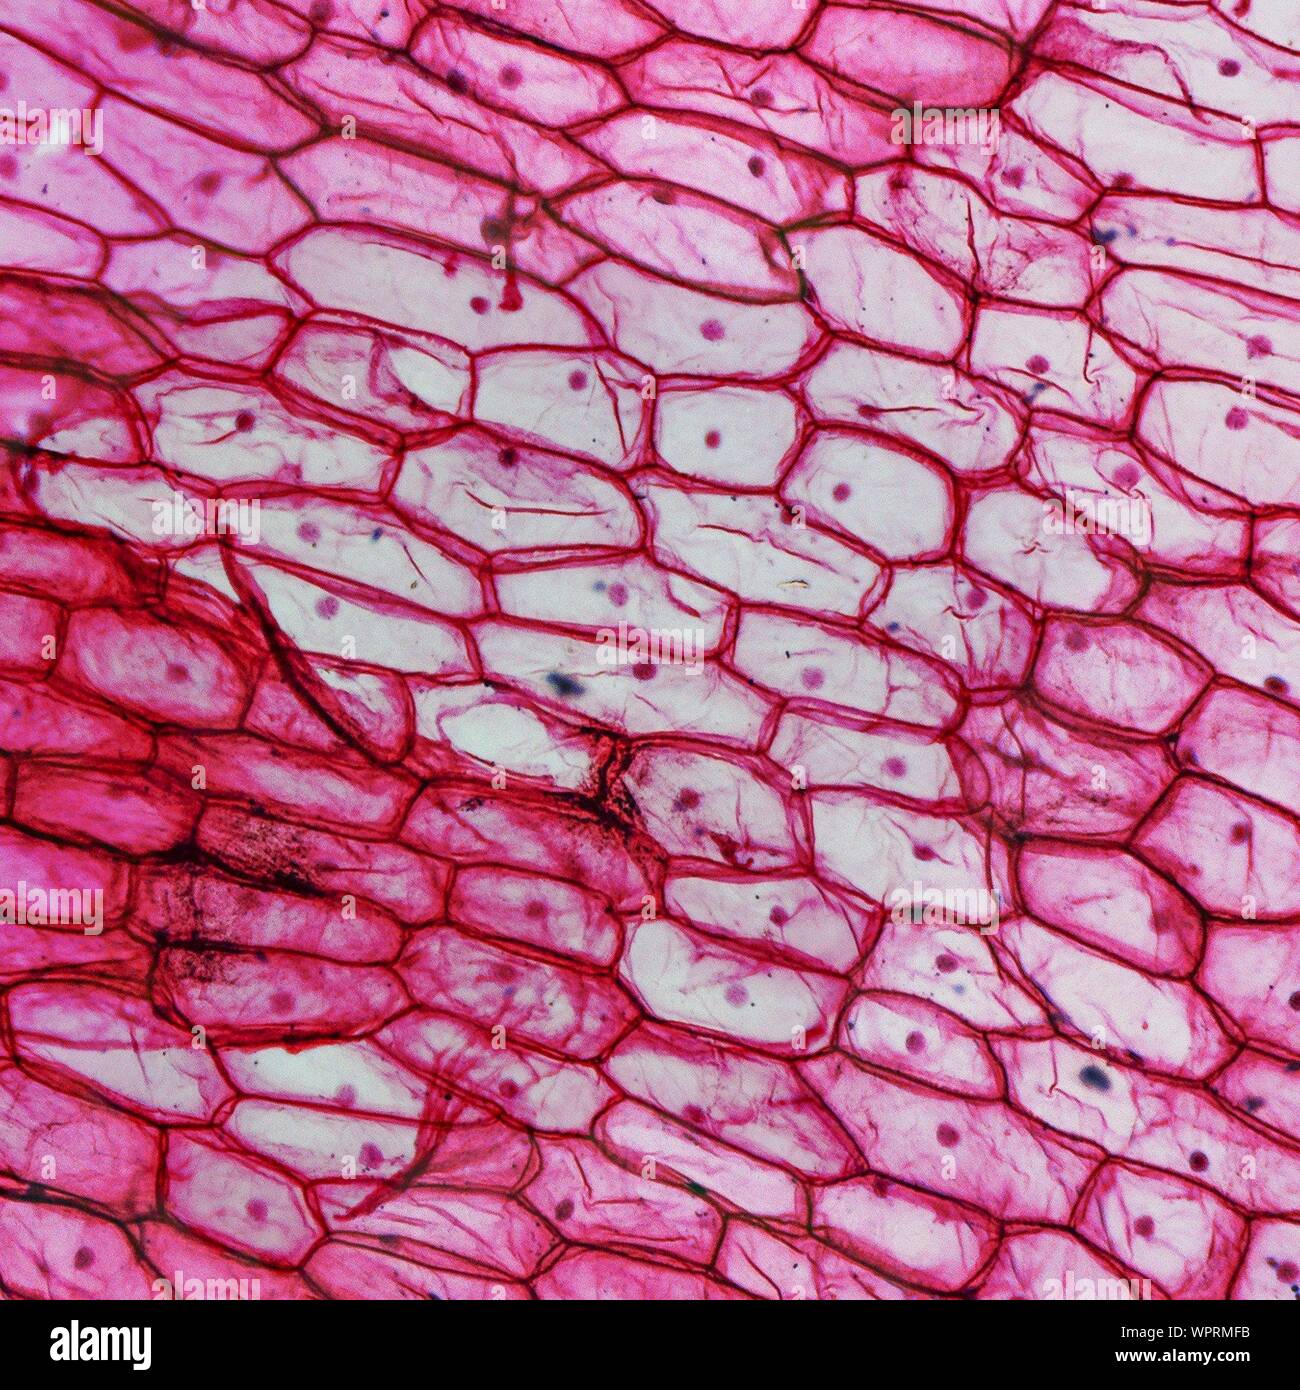 Microscopic View Of Cells Stock Photo - Alamy